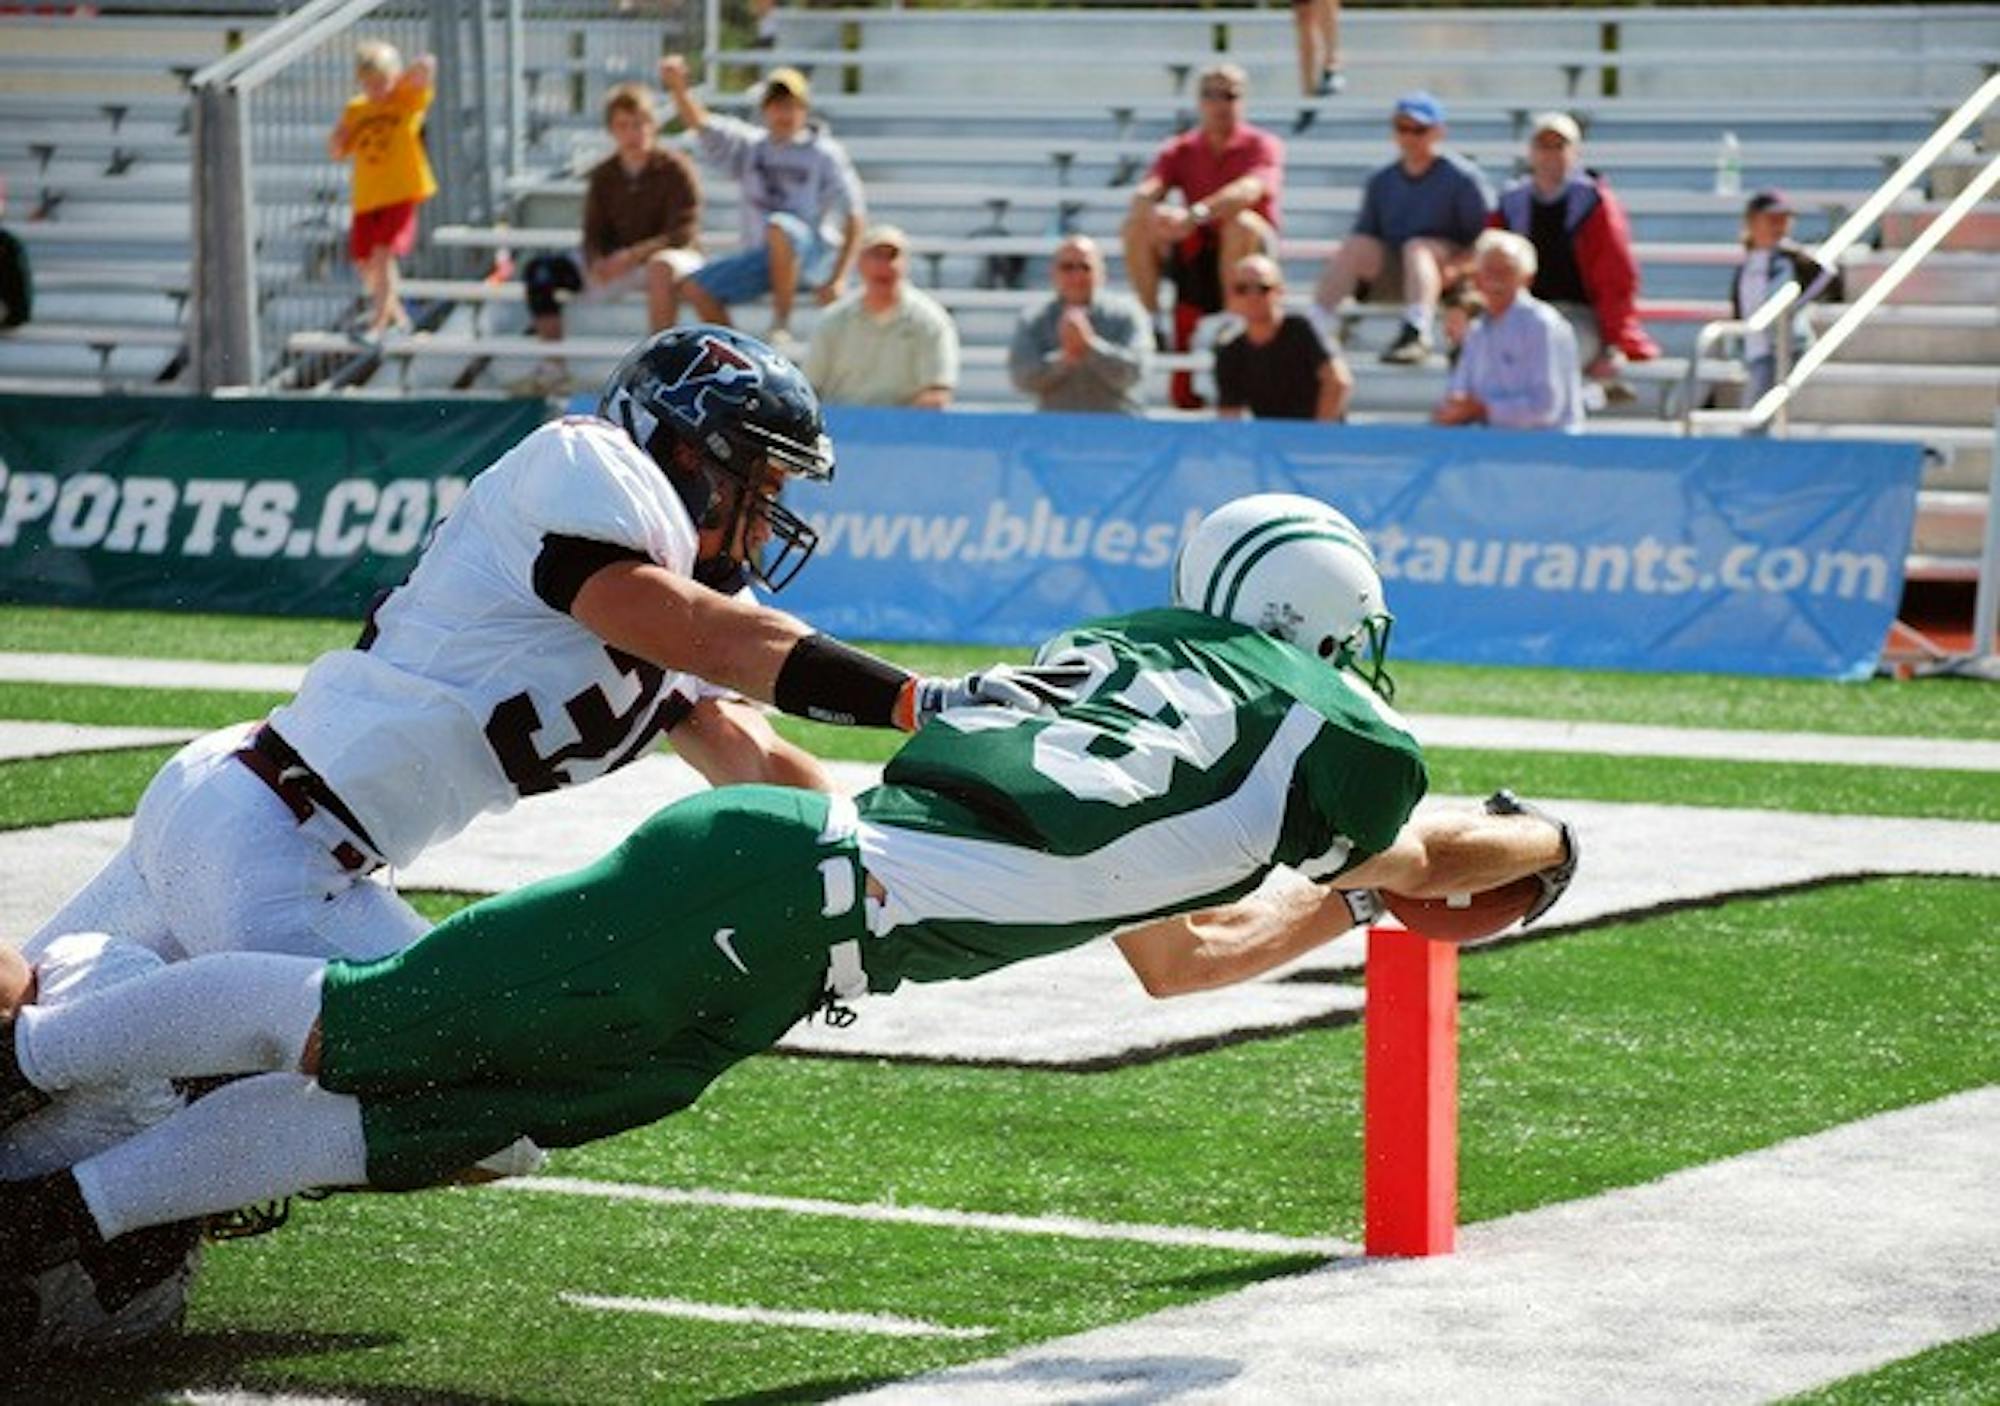 Big Green receiver Eric Paul '09 reaches for the endzone during Dartmouth's dramatic 21-13 win over Penn.